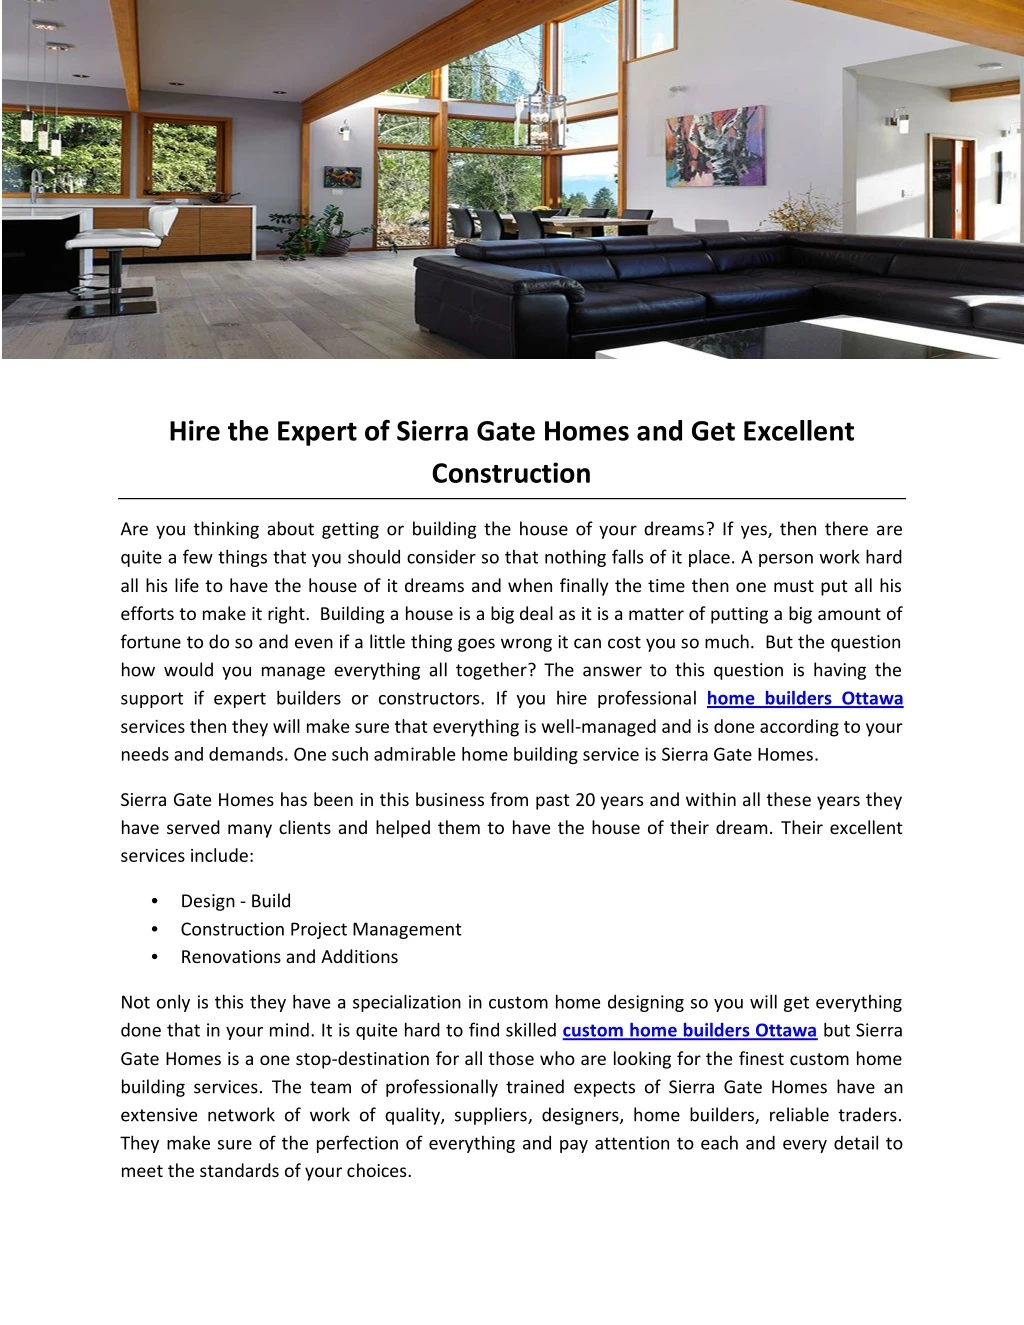 hire the expert of sierra gate homes